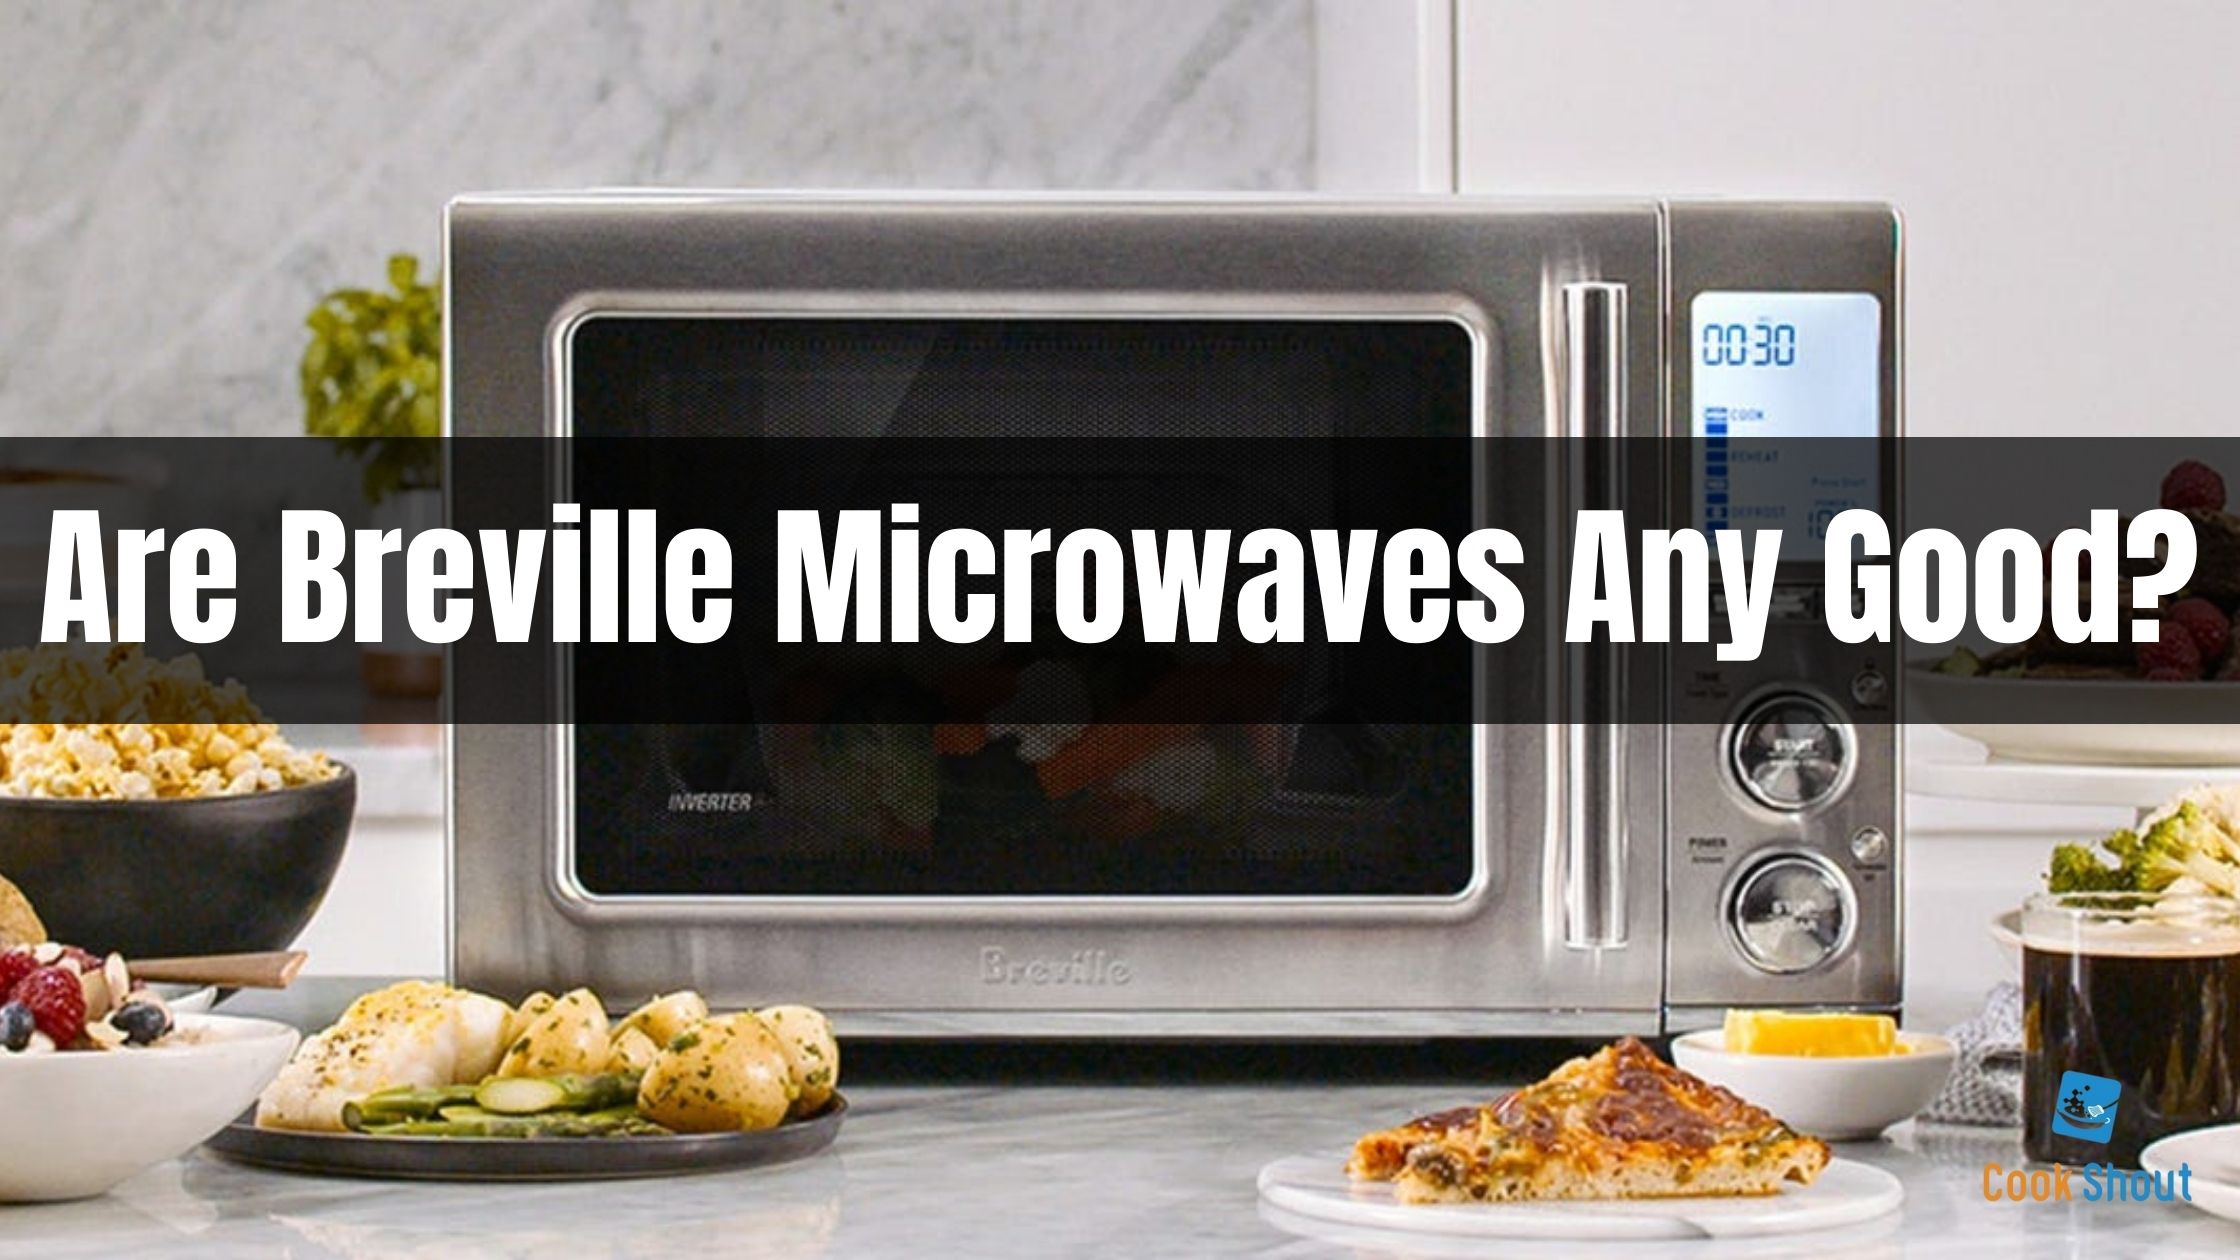 Are Breville Microwaves Any Good